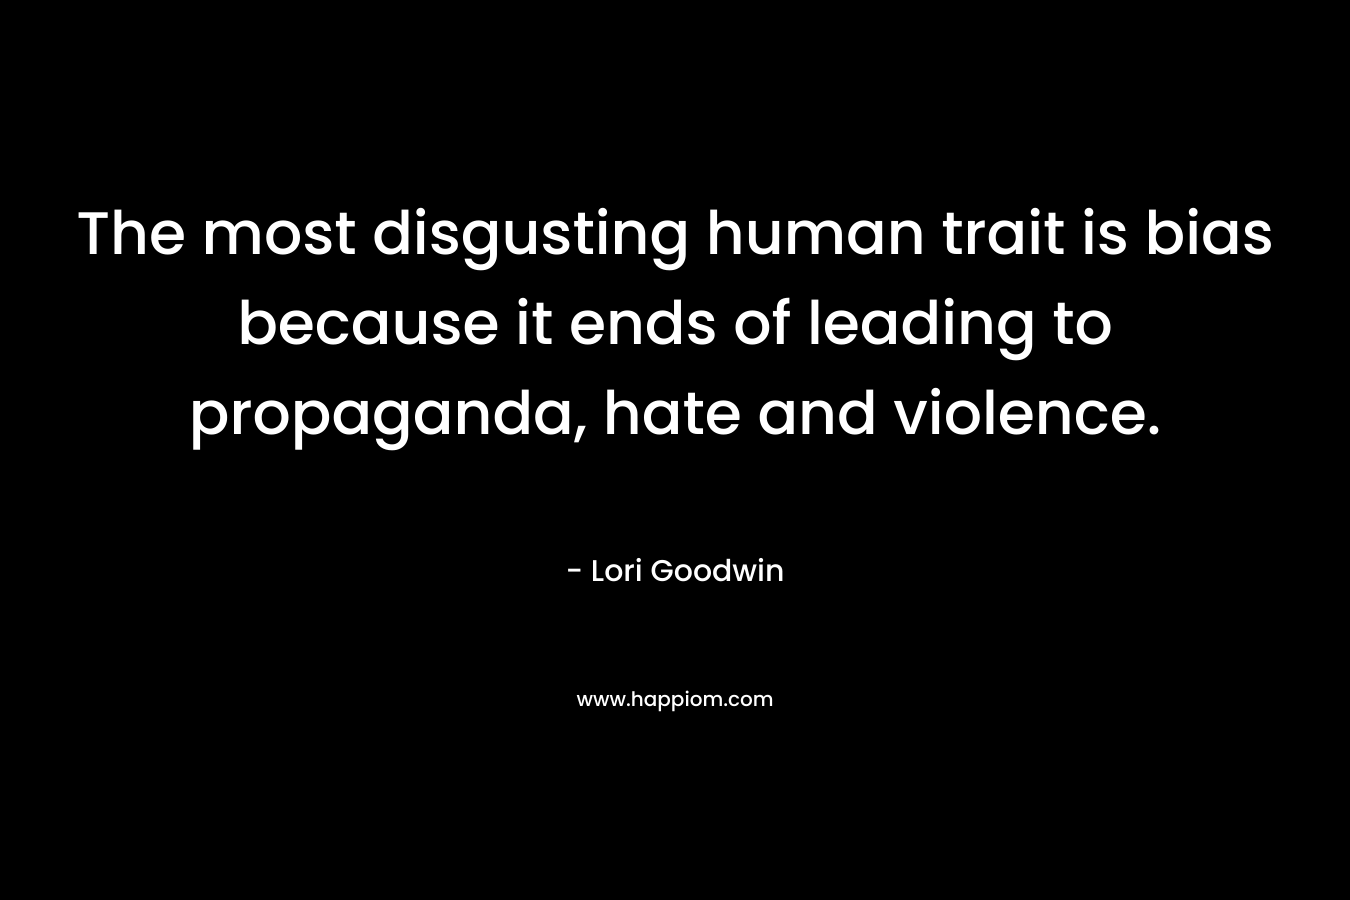 The most disgusting human trait is bias because it ends of leading to propaganda, hate and violence.